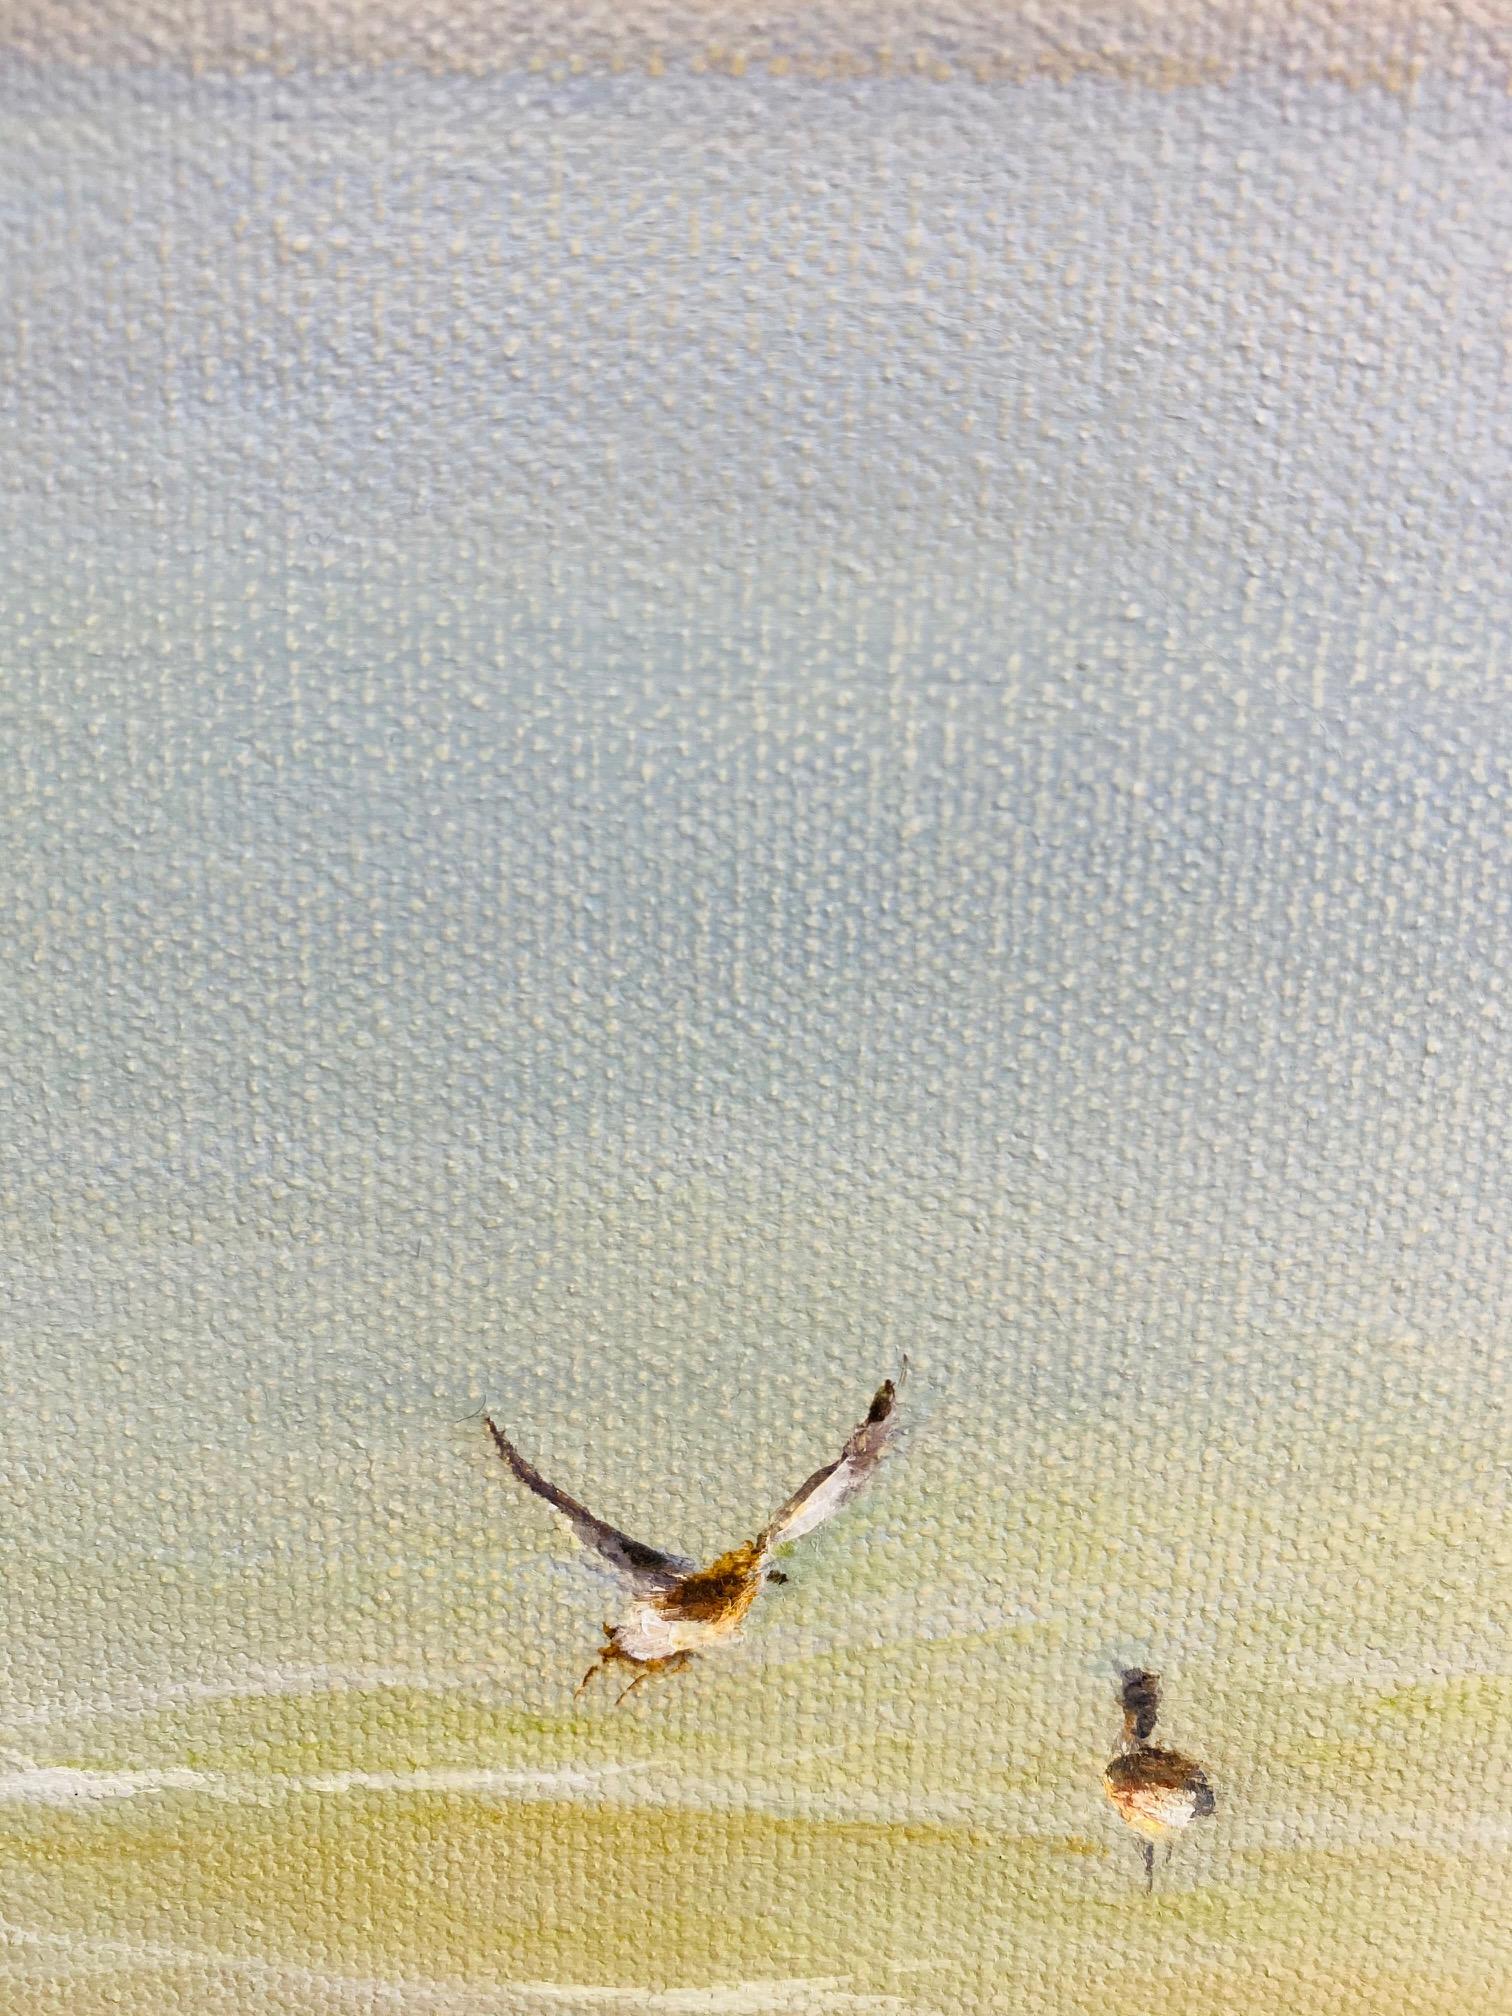 Seagulls in Flight, original 16x40 contemporary marine landscape - Contemporary Painting by Chieh-Nie Cherng